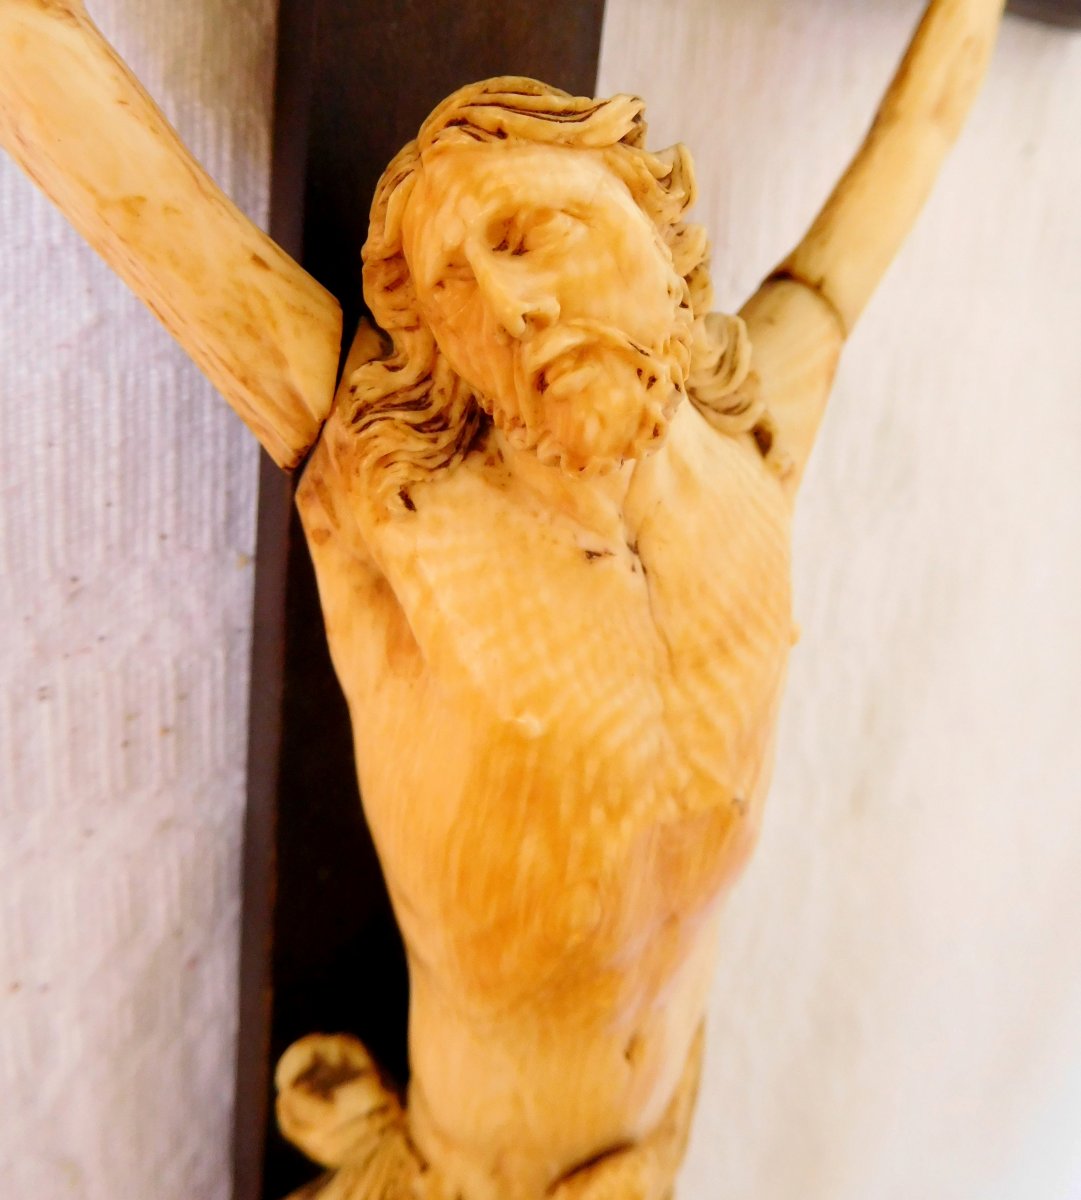 Christ In Ivory, Crucifix From Bed Bottom, 18th Century Period - Carved Wood & Gilded Gold-photo-4